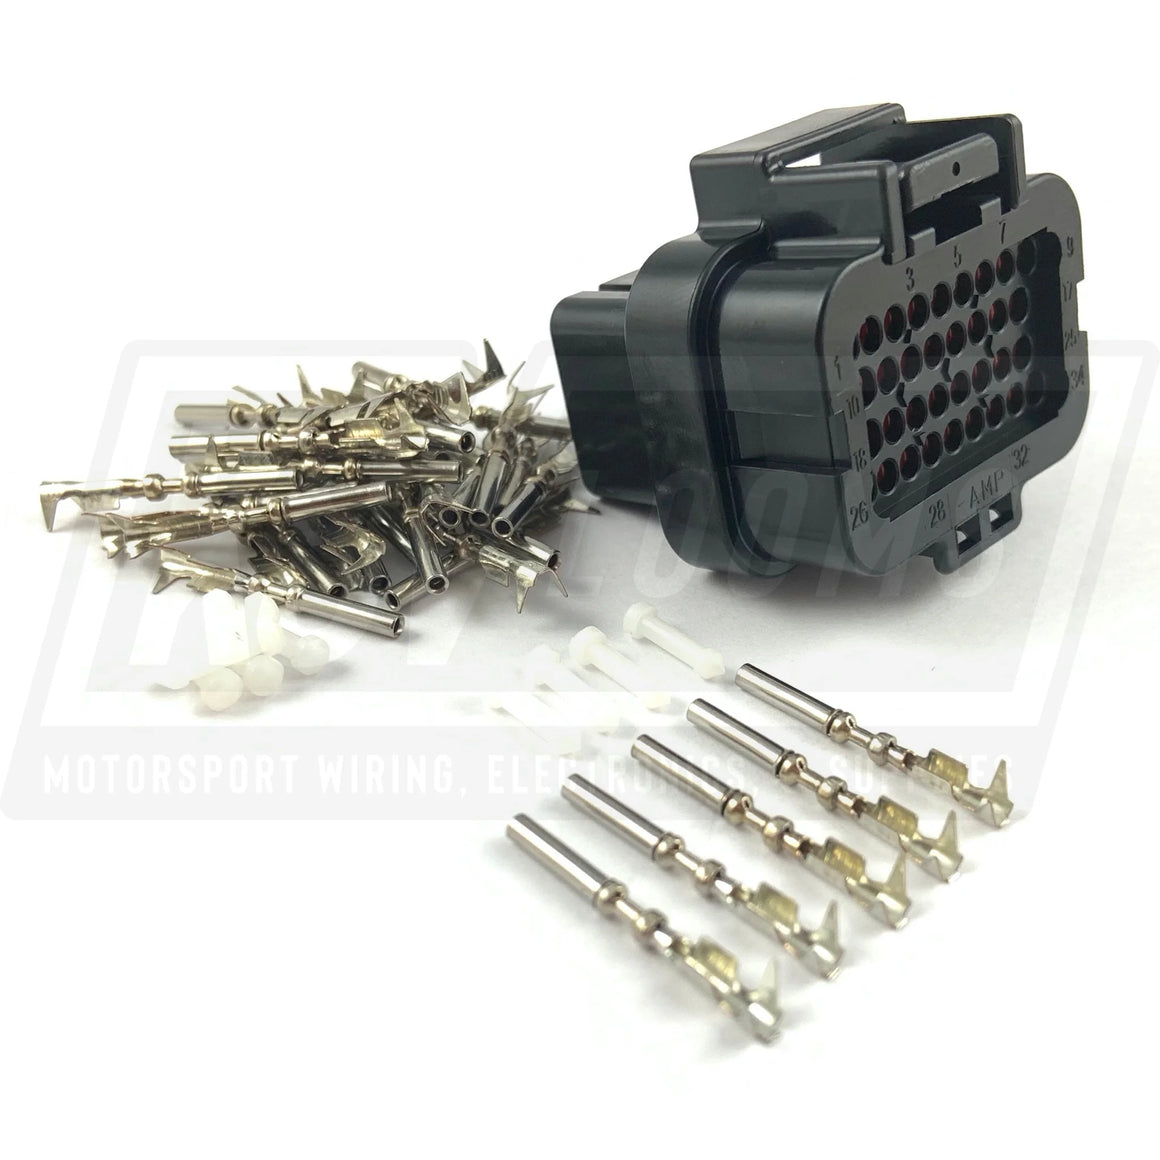 34-Way Connector Kit For Fueltech Ft600 Ecu (Connector A) (24-20 Awg)